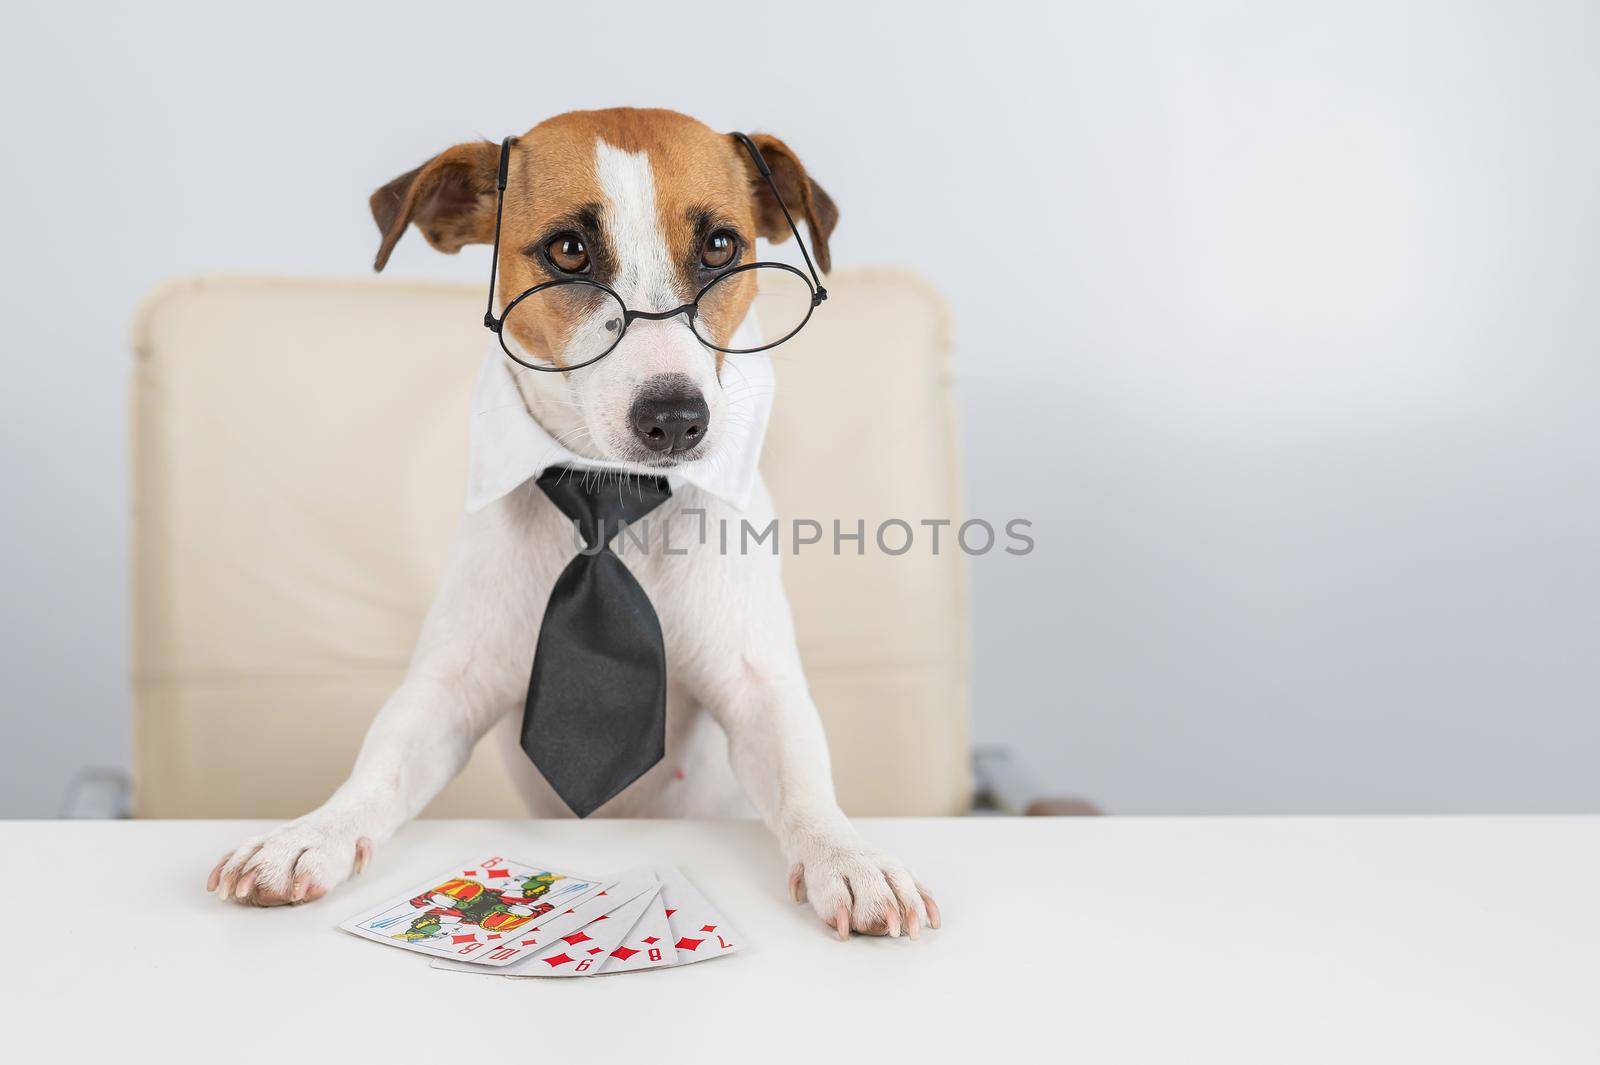 Jack russell terrier dog with glasses and tie plays poker. Addiction to gambling card games. by mrwed54